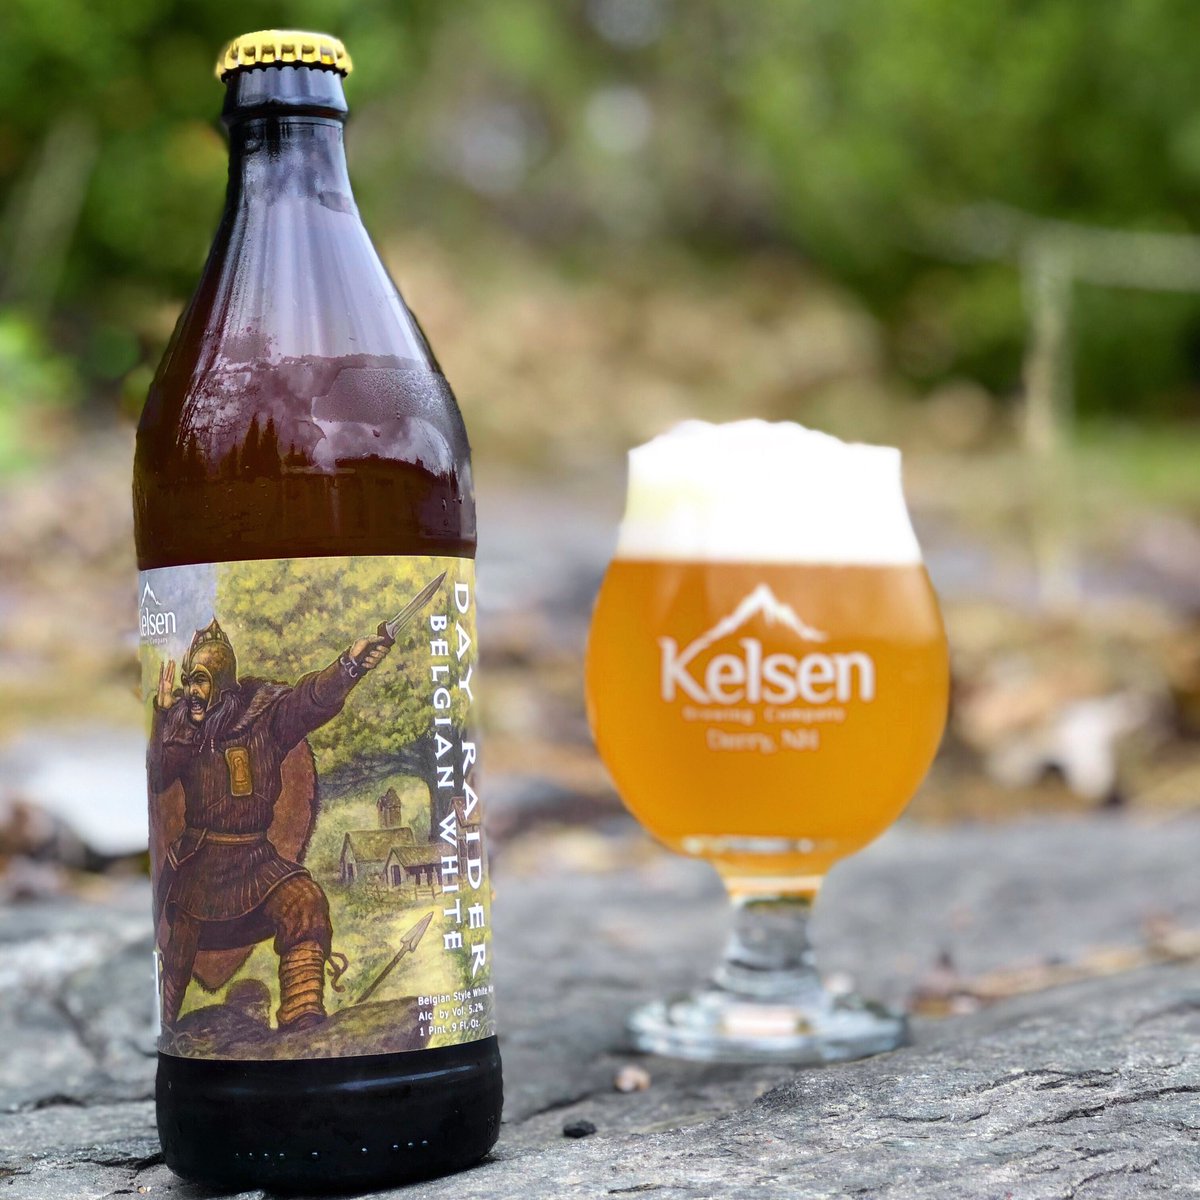 Happy Mother’s Day! We’re open regular hours today for pizza and beer 🍕🍻
#kelsenbrewing #belgianwhite #witbier #belgianstyle #nhbrewers #nhbeertrail #nhbeer #nh #drinknh #mothersday #brewery #craftbeer